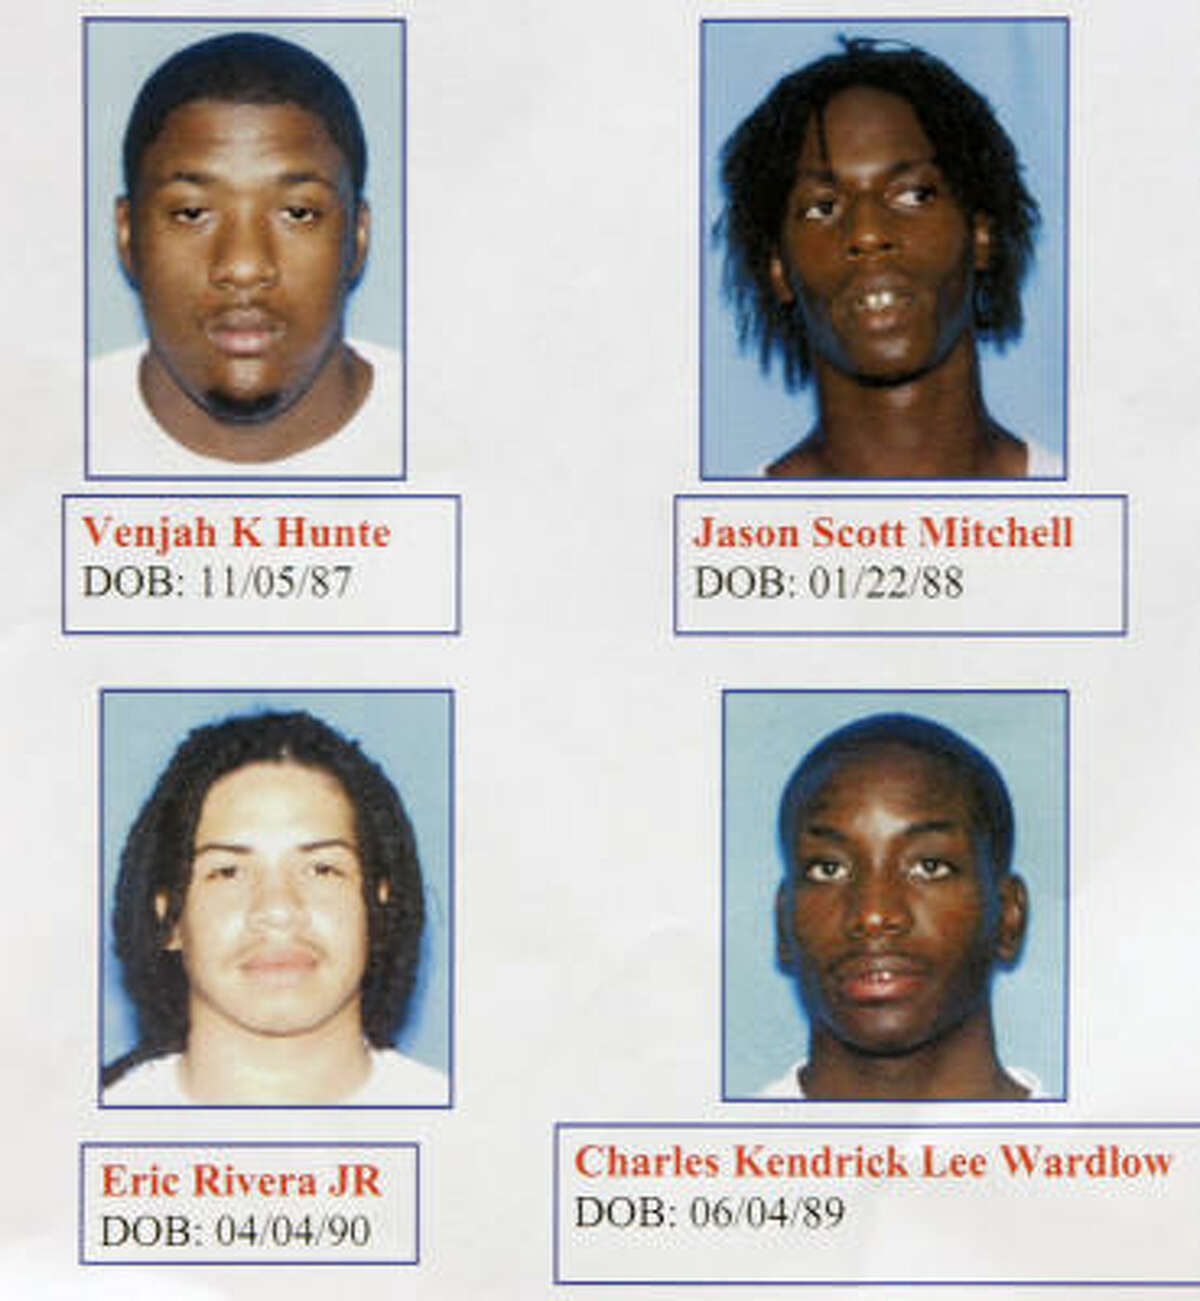 Undated photos provided by the Miami-Dade Police Department shows the four suspects arrested Friday: Venjah K. Hunte, 20; Jason Scott Mitchell, 19; Eric Rivera, Jr., 17; and Charles Kendrick Lee Wardlow, 18.